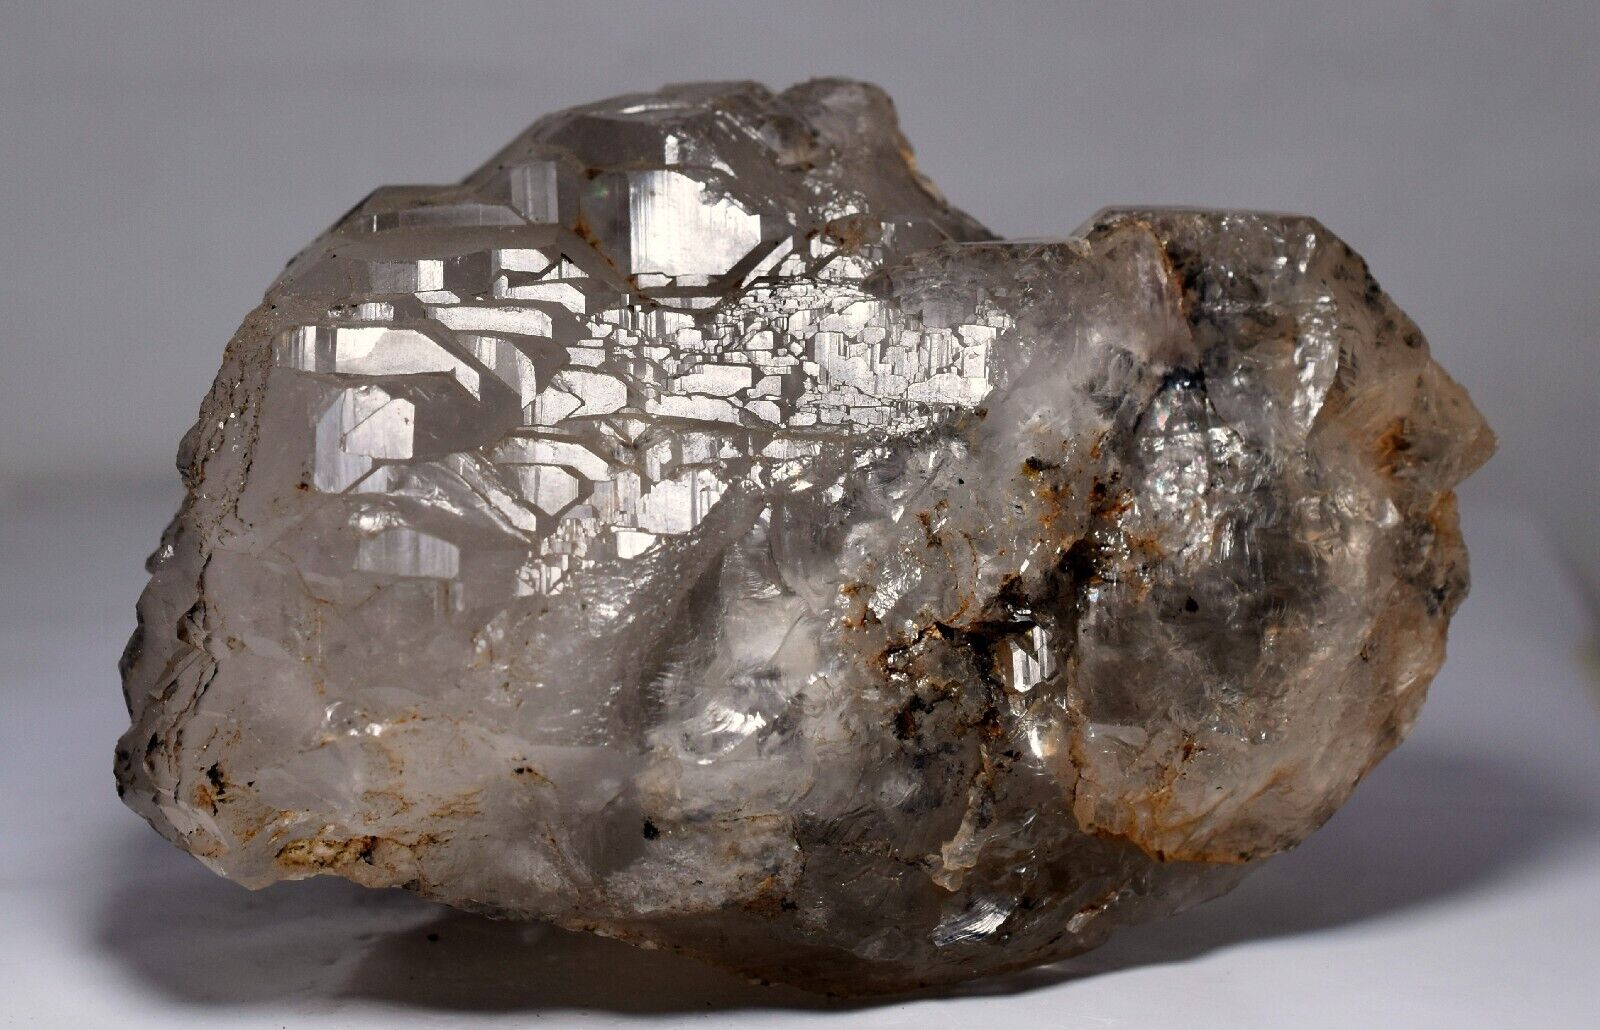 1148 GM Extremely Rare Gwindel Quartz Crystals Formation Specimen From Pakistan